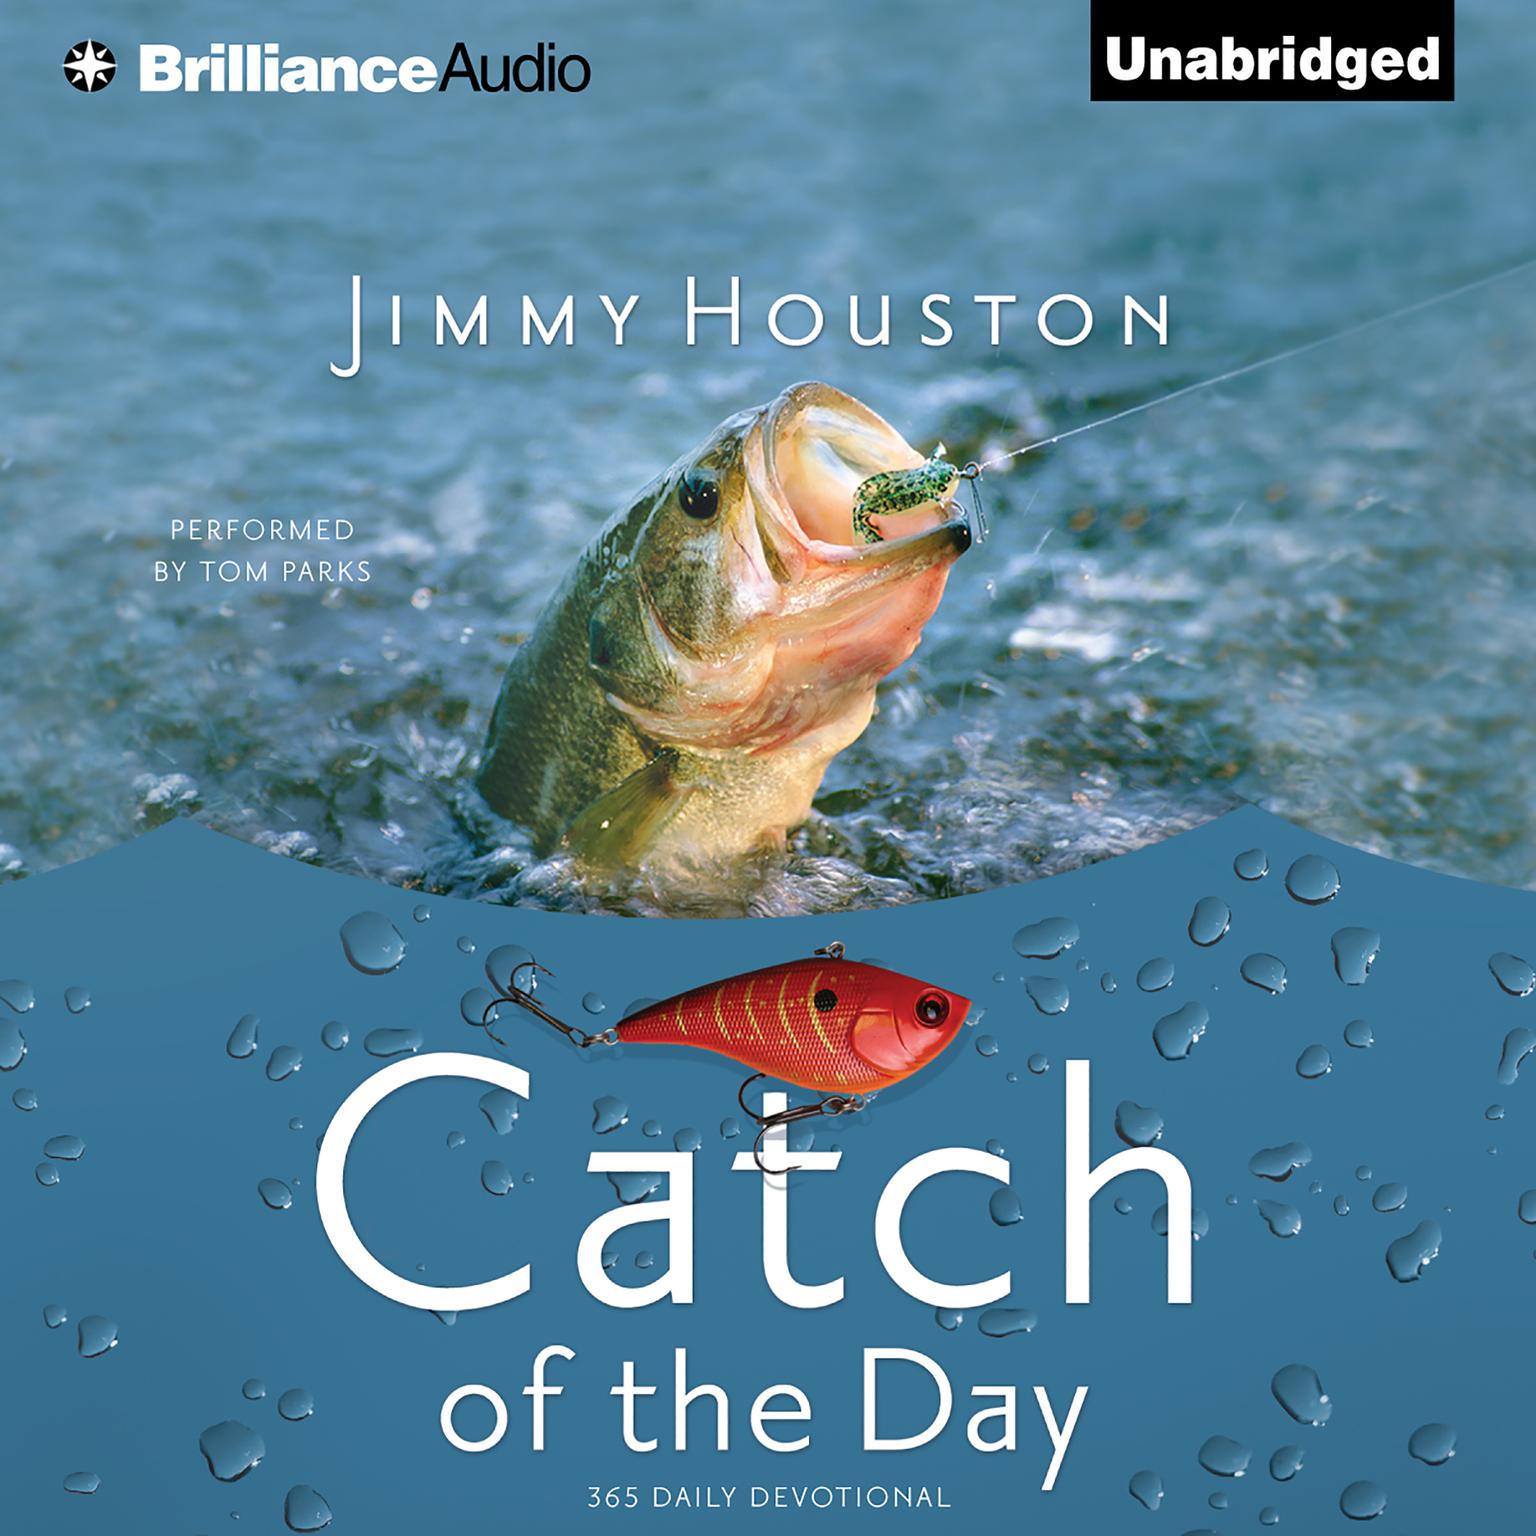 Catch of the Day Audiobook, by Jimmy Houston